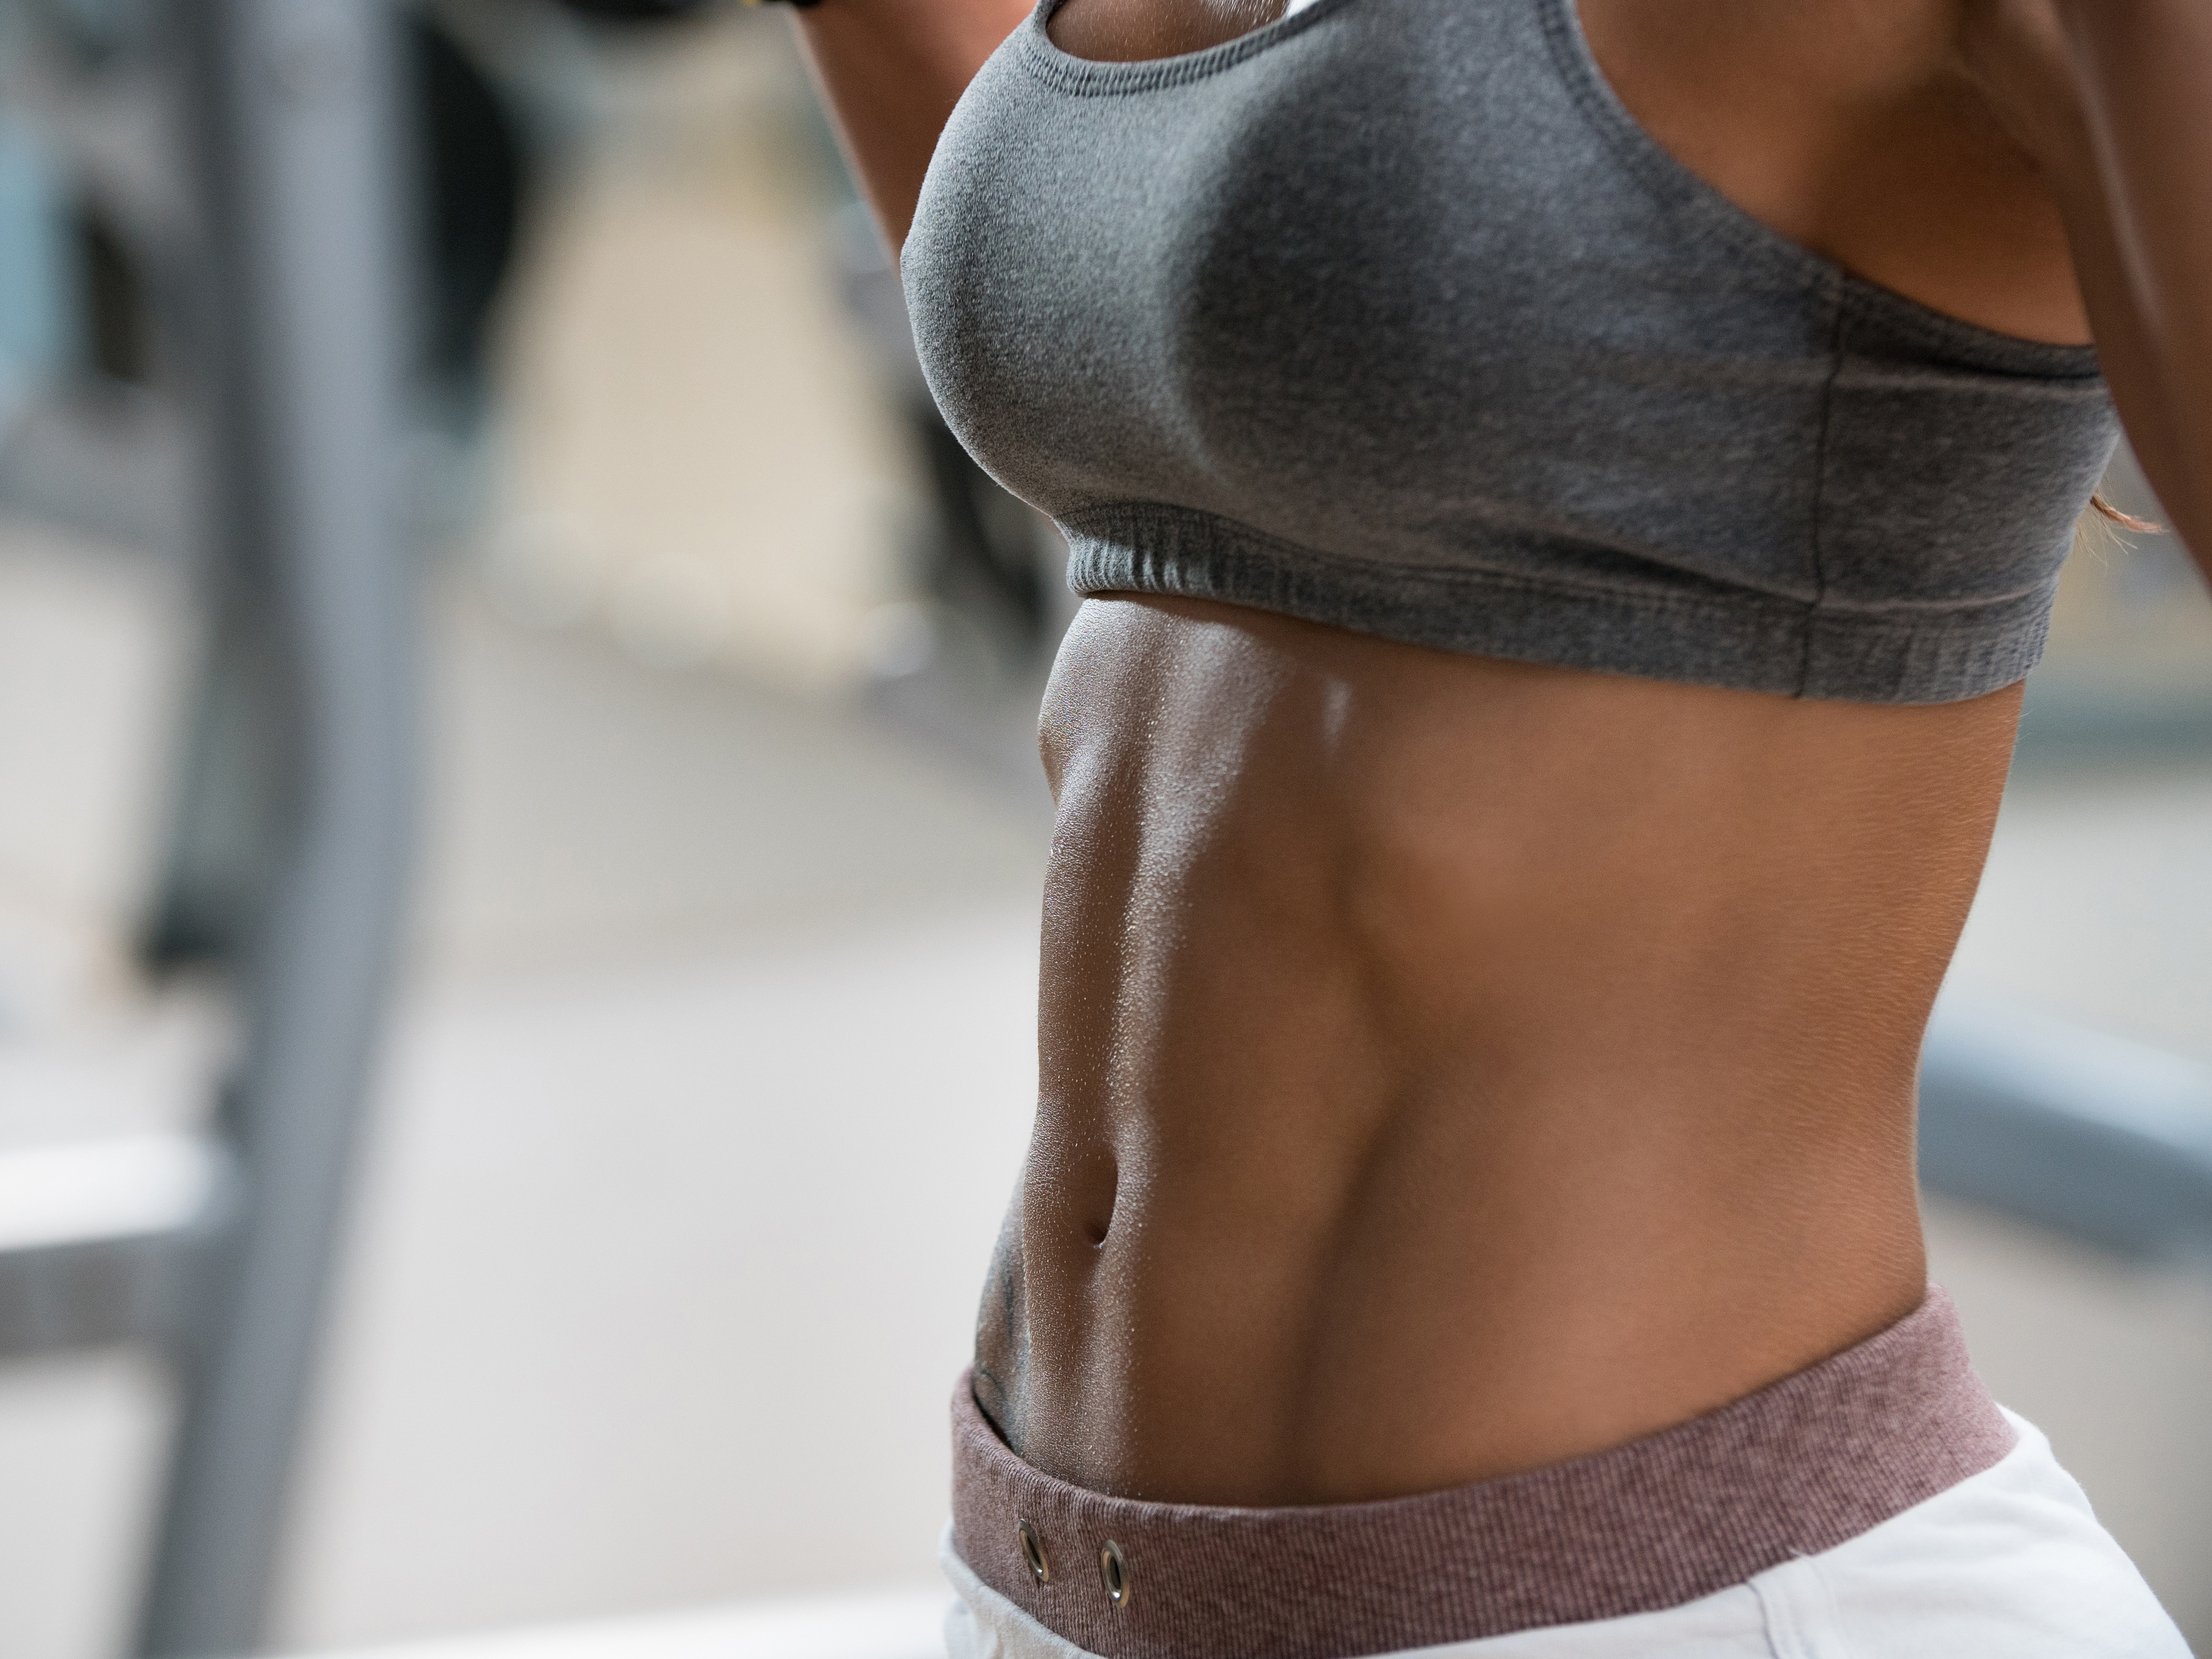 Why six-pack abs are so hard to achieve – and maintain